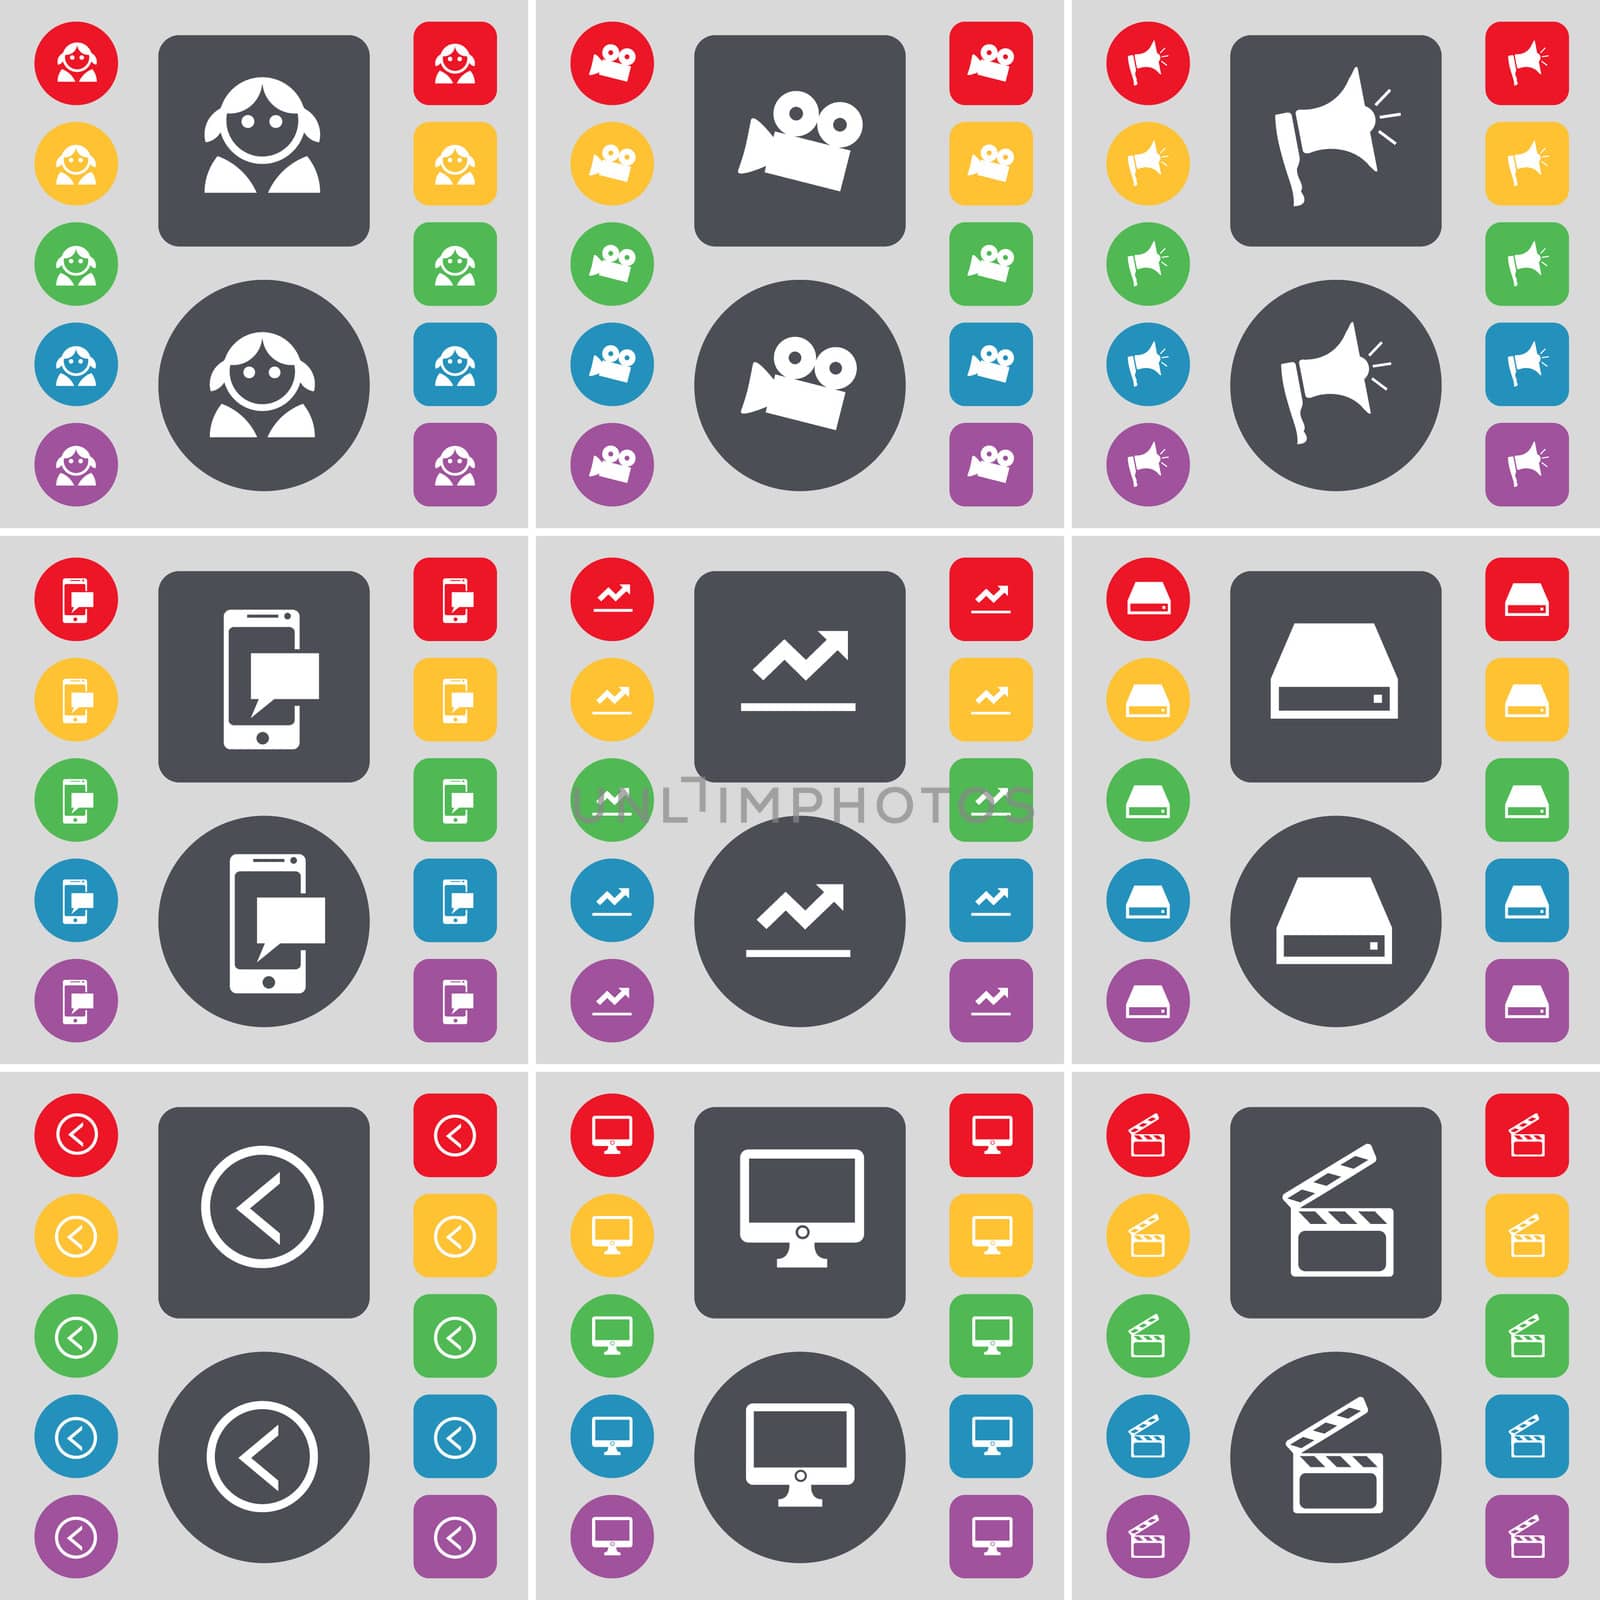 Avatar, Film camera, Megaphone, SMS, Graph, Hard drive, Arrow left, Monitor, Clapper icon symbol. A large set of flat, colored buttons for your design. illustration